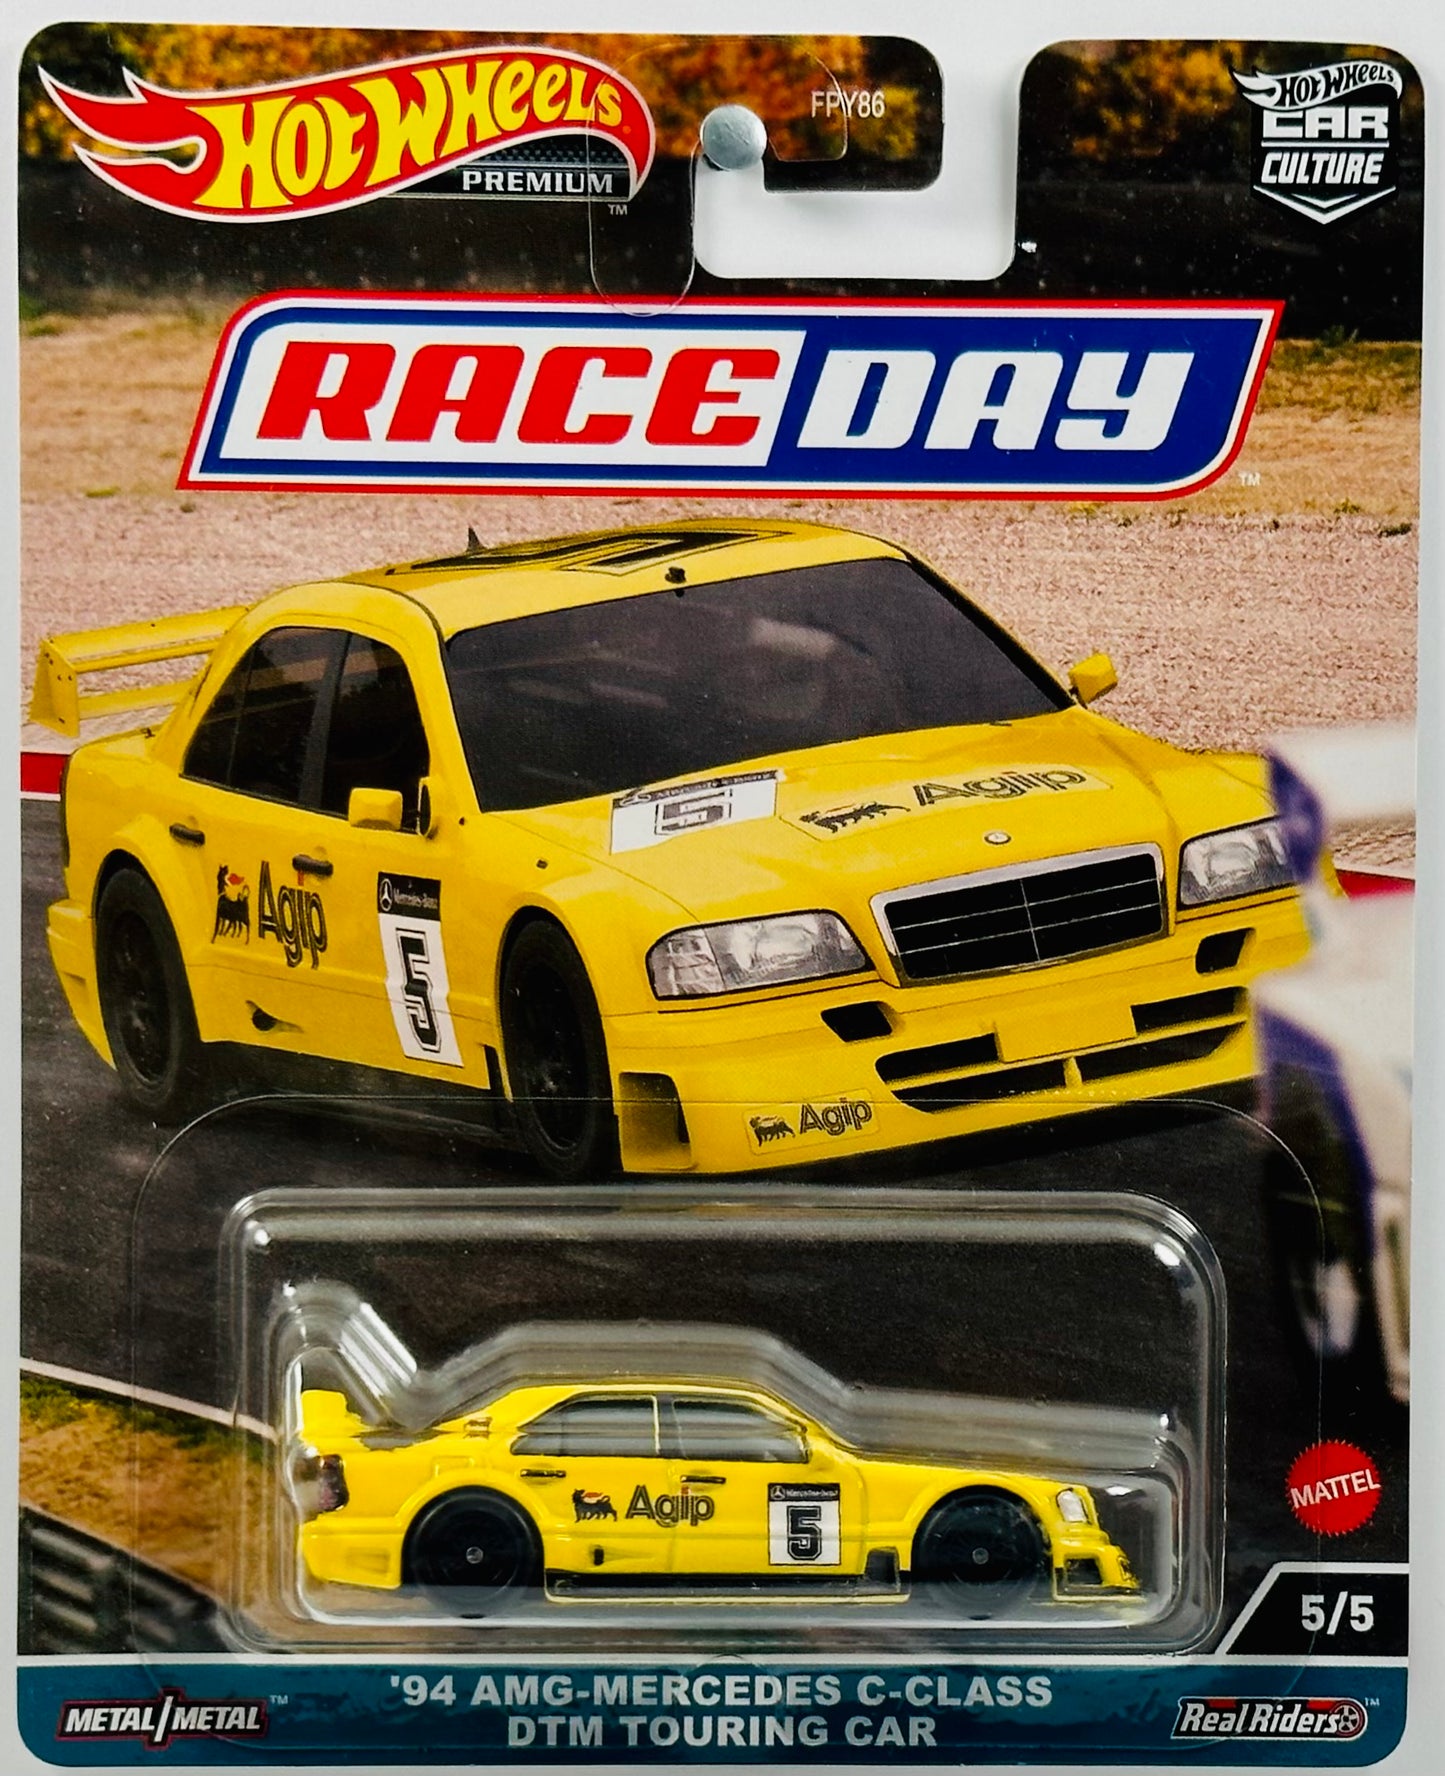 Hot Wheels 2023 - Car Culture: Race Day 5/5 - '94 AMG-Mercedes C-Class DTM Touring Car - Yellow - Metal/Metal & Real Riders